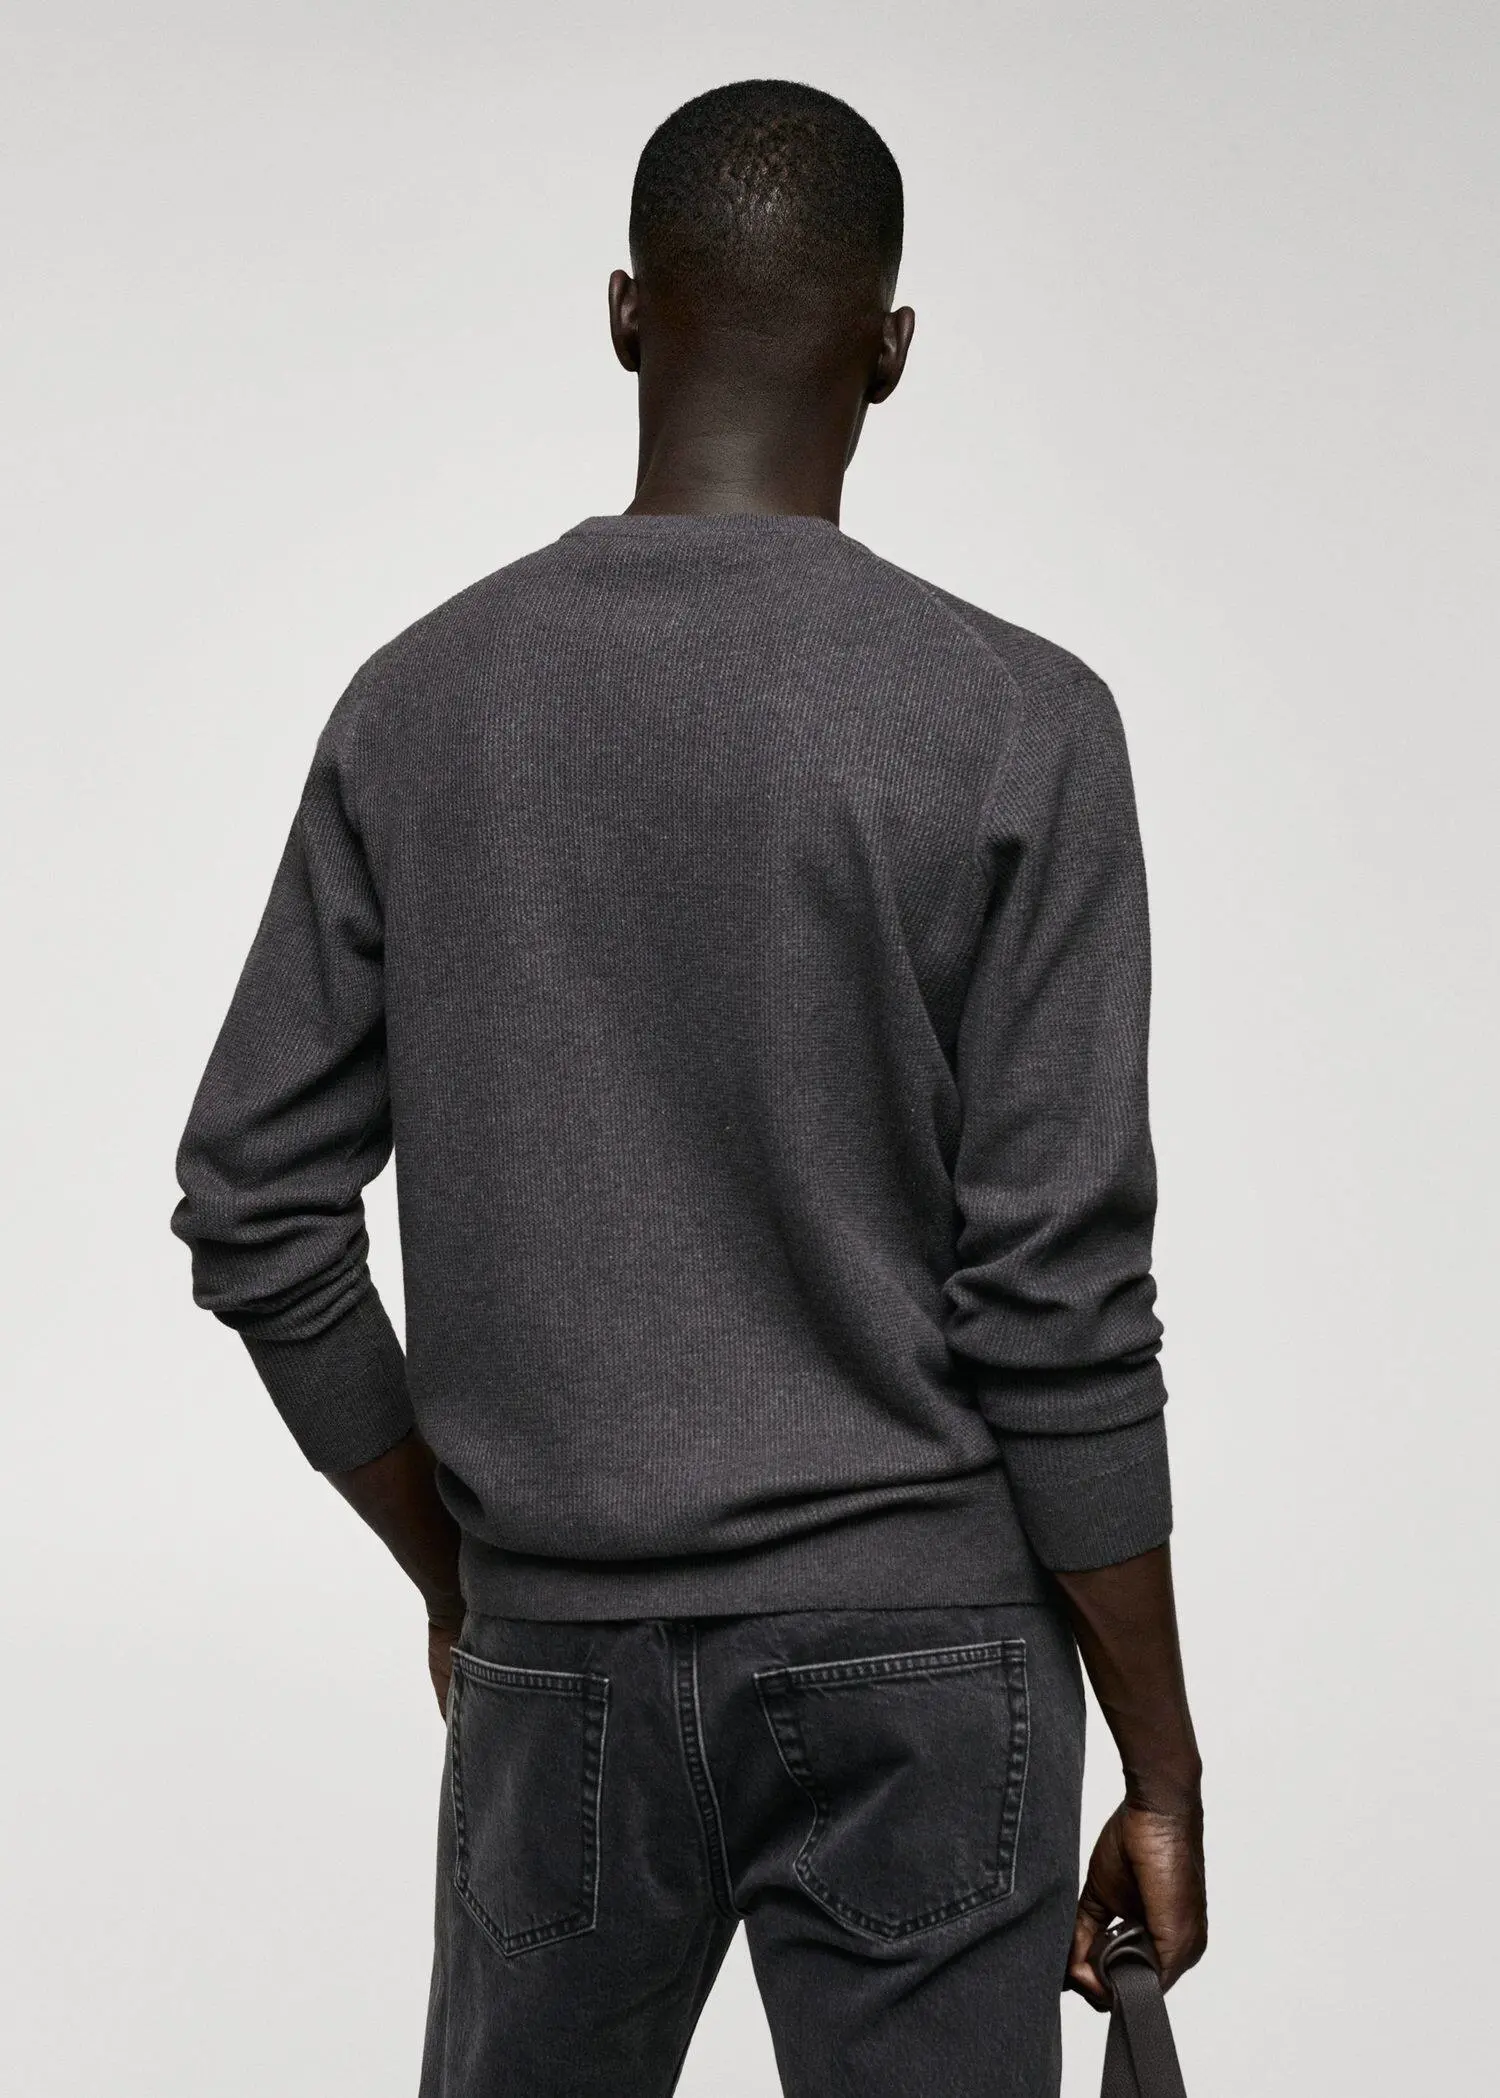 Mango Structured cotton sweater. a man wearing a gray sweater and jeans. 